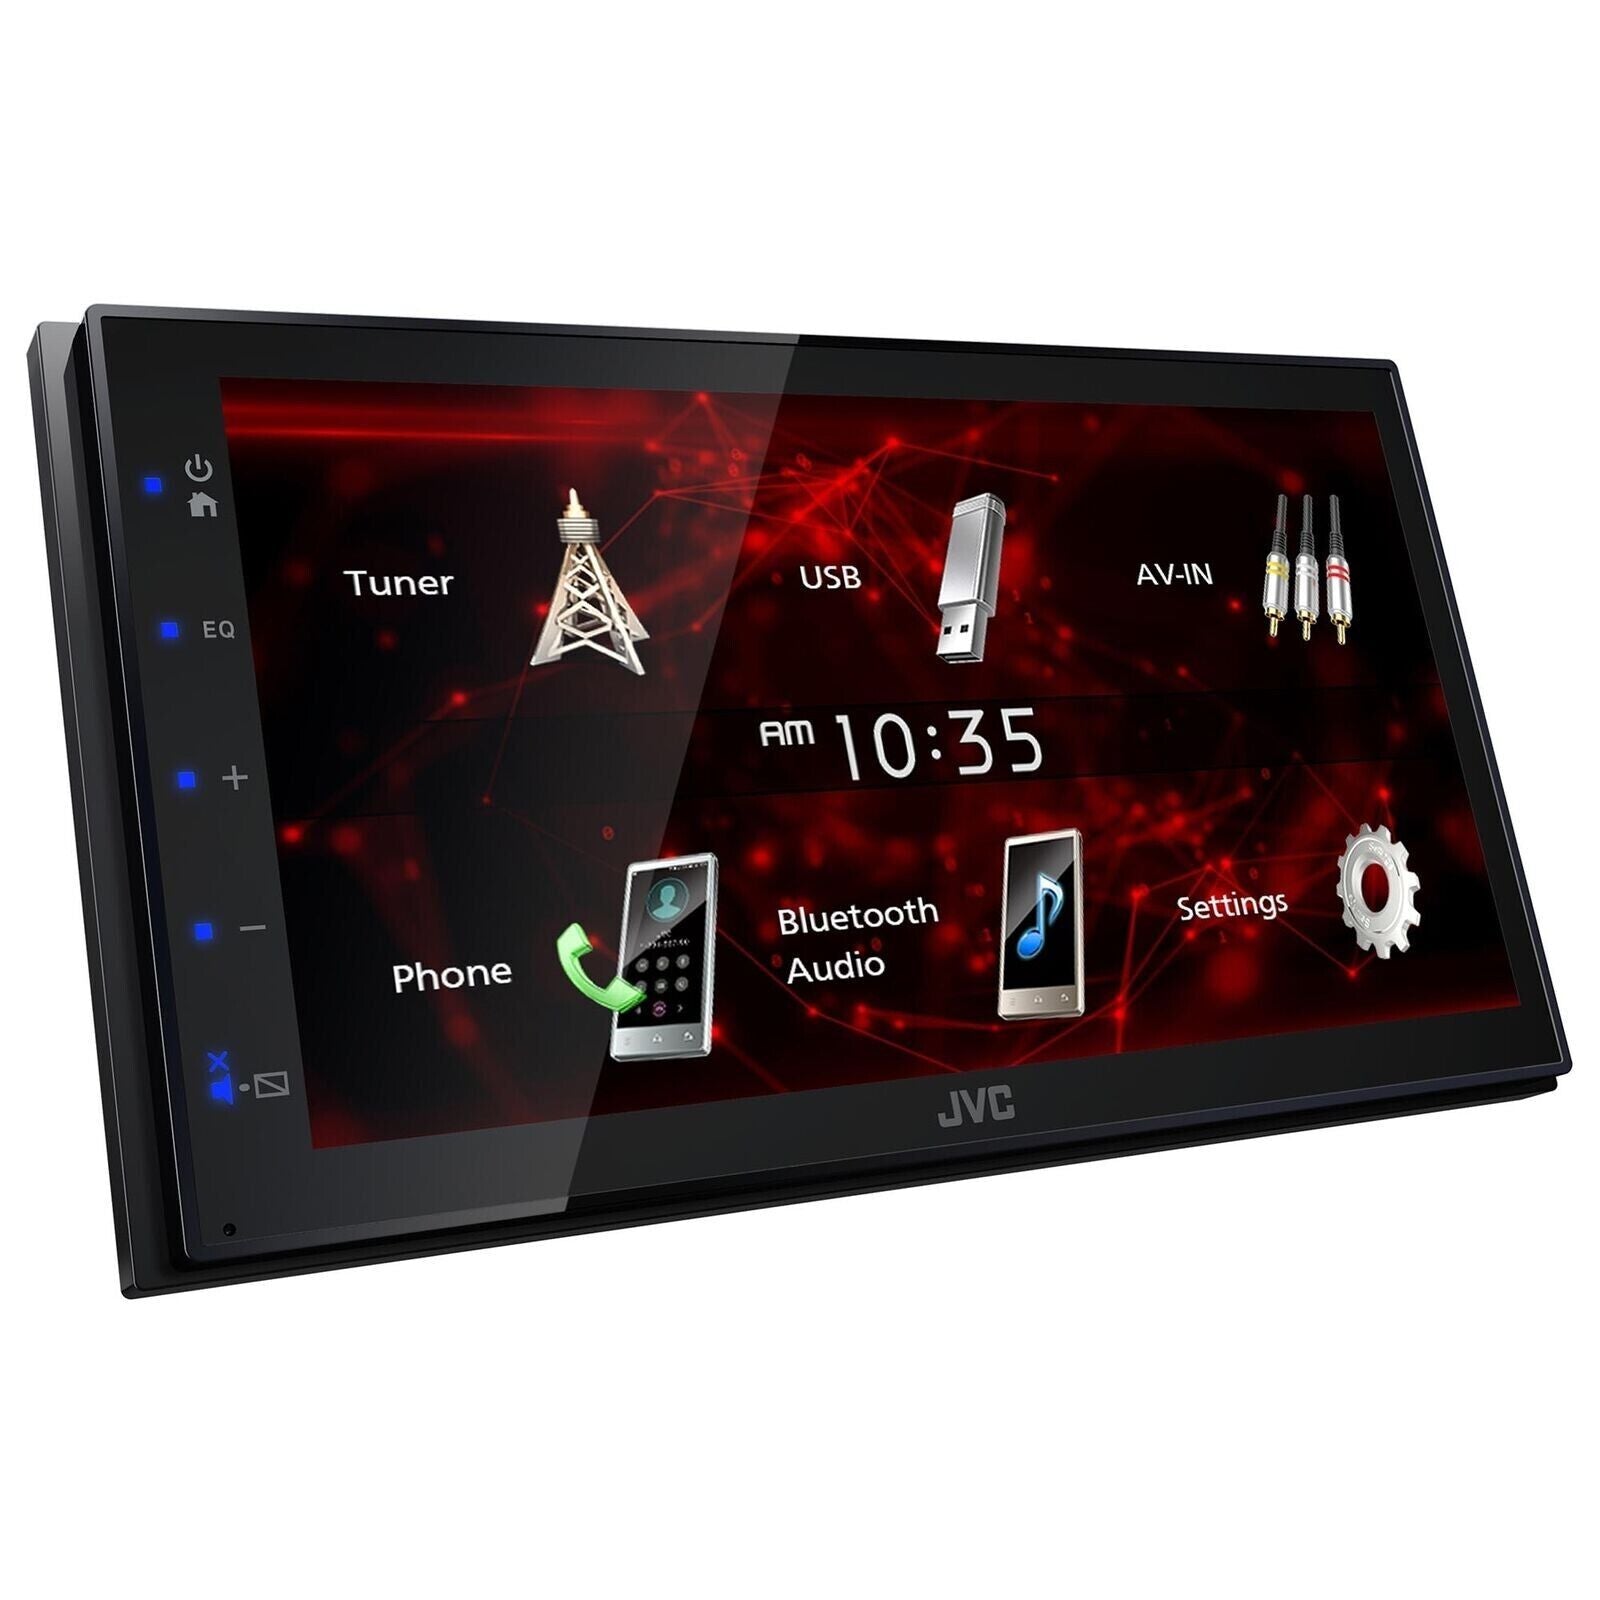 JVC KW-M180BT 2 DIN 6.75" Media Player USB Mirroring For Android Bluetooth + CAM1500 Backup Camera